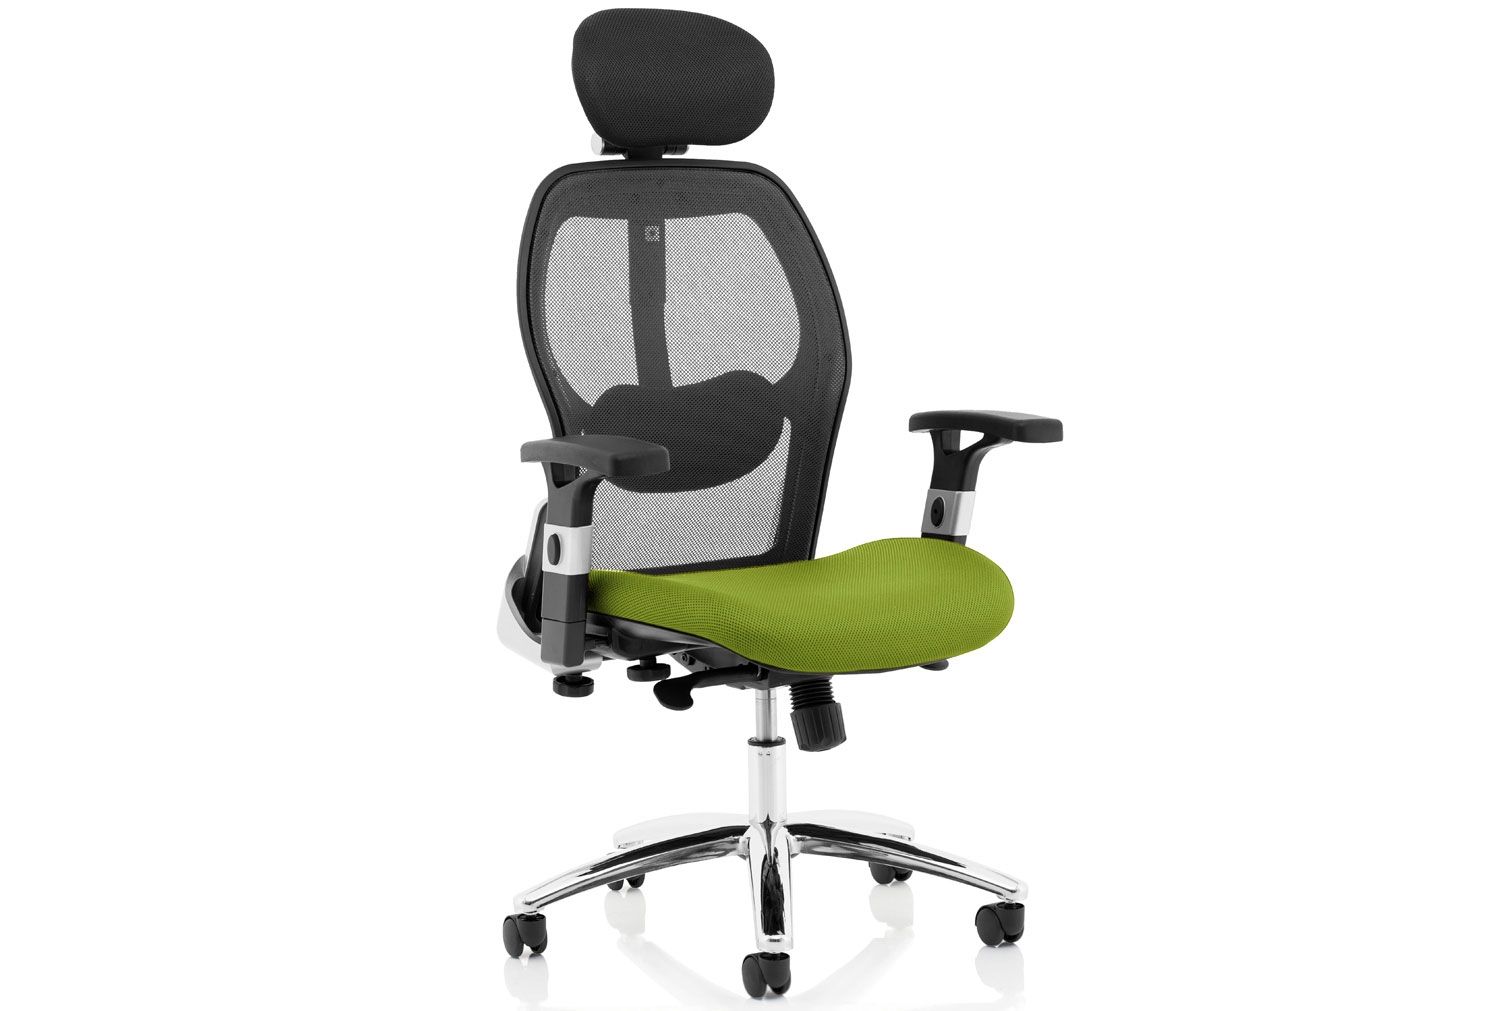 Alva High Mesh Back Operator Office Chair With Coloured Fabric Seat, Myrrh Green, Fully Installed